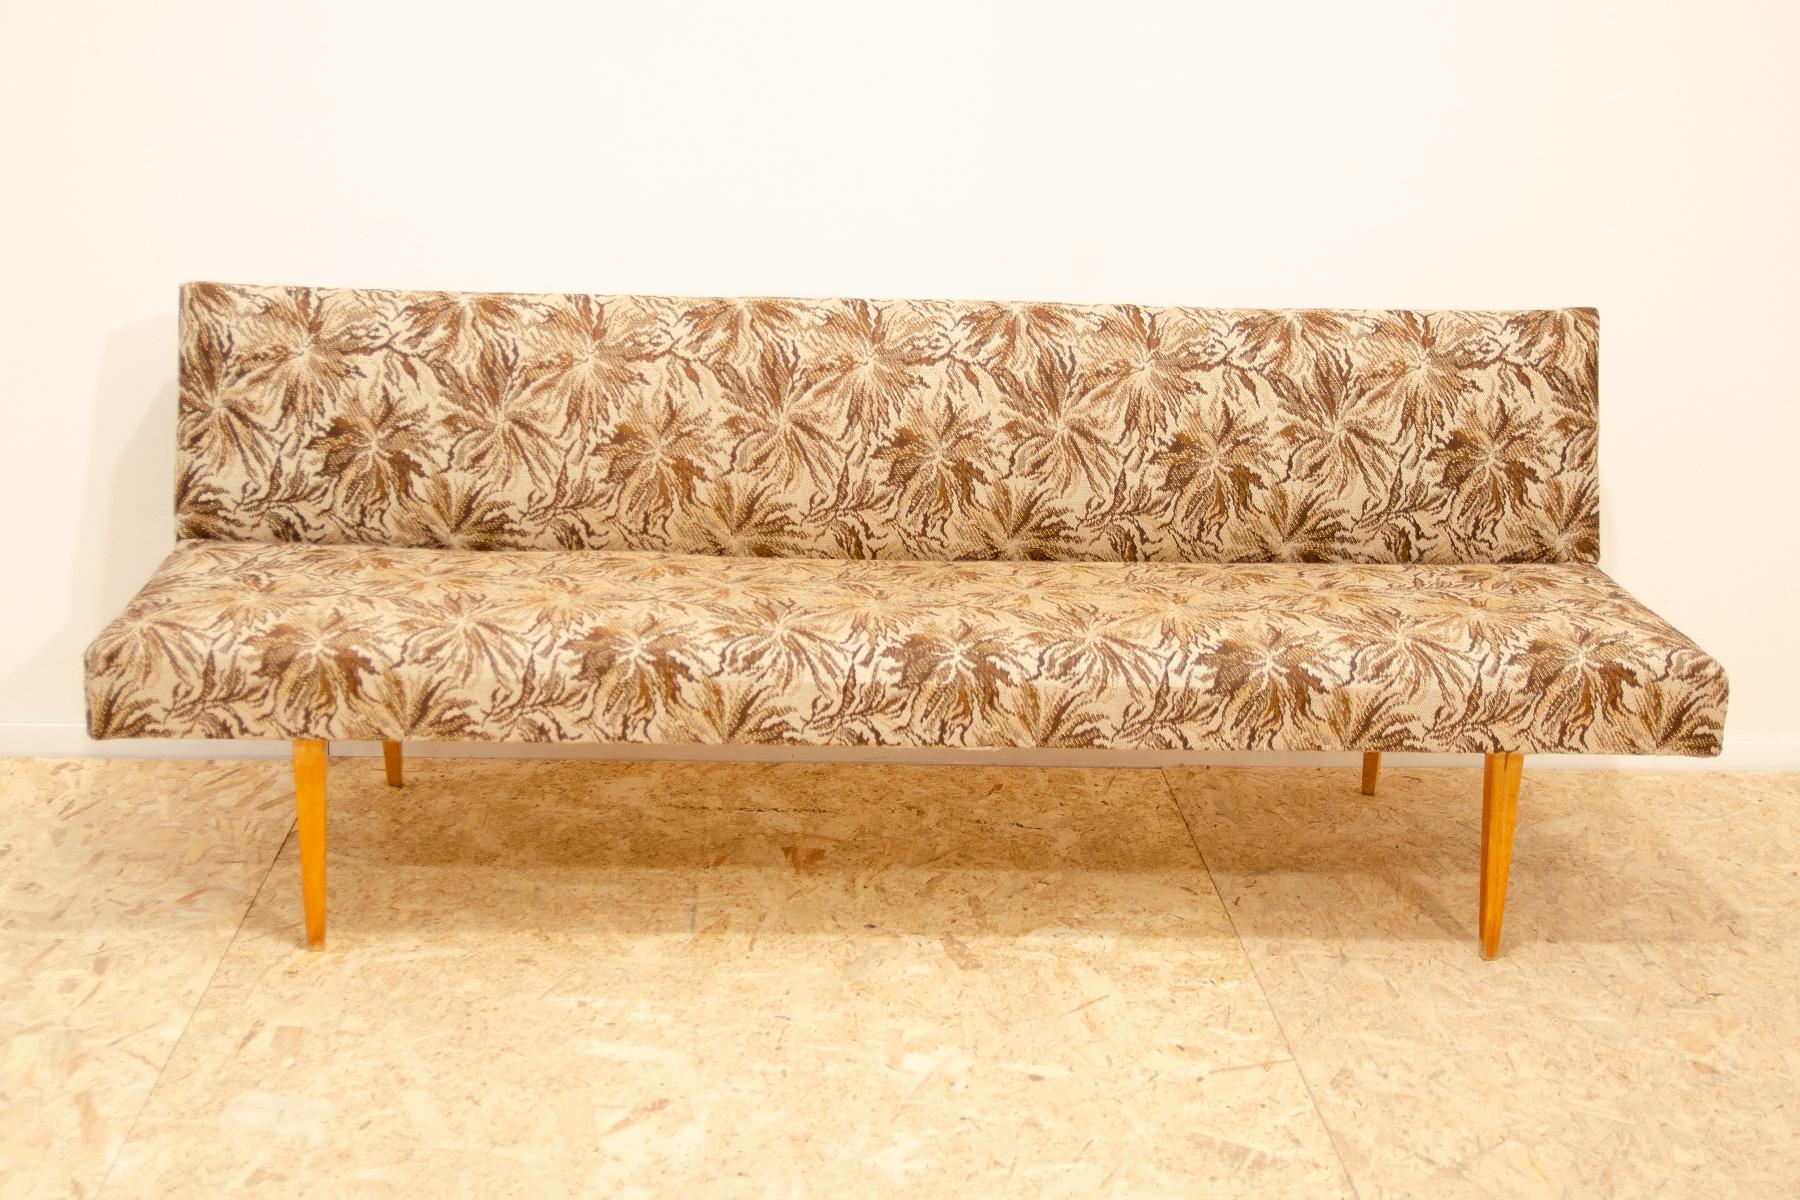 Mid century sofa/daybed, made in the former Czechoslovakia in the 1960´s, designed by Miroslav Navrátil. Material: beech wood, fabric. The sofa is in well preserved Vintage condition, shows slight signs of age and using.

Height: 70 cm

Lenght: 196